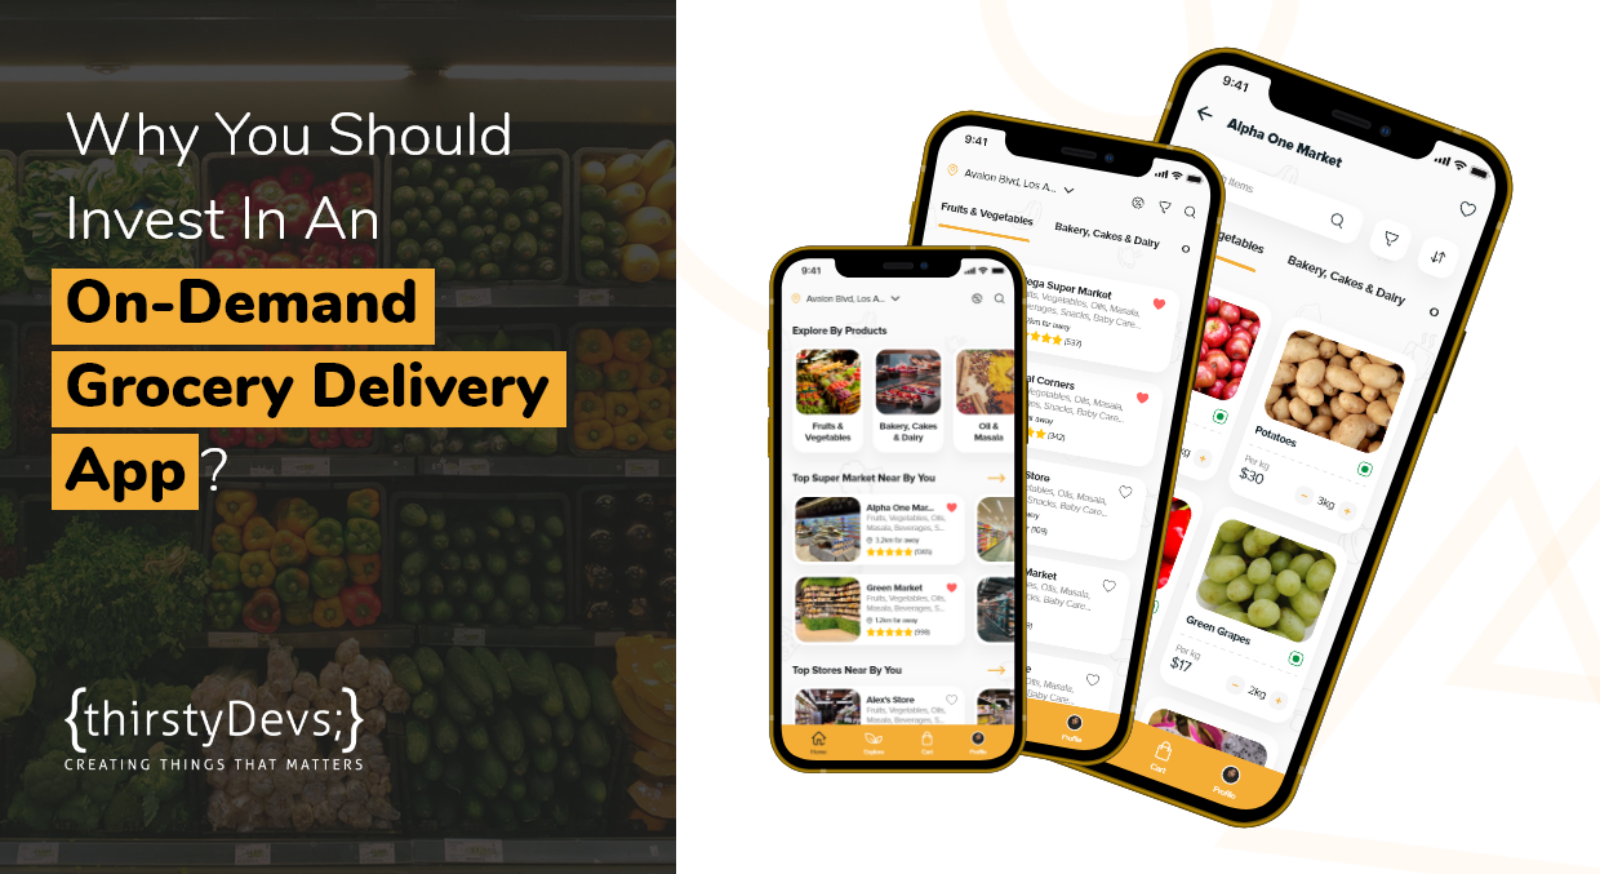 Why You Should Invest In An On-Demand Grocery Delivery App?